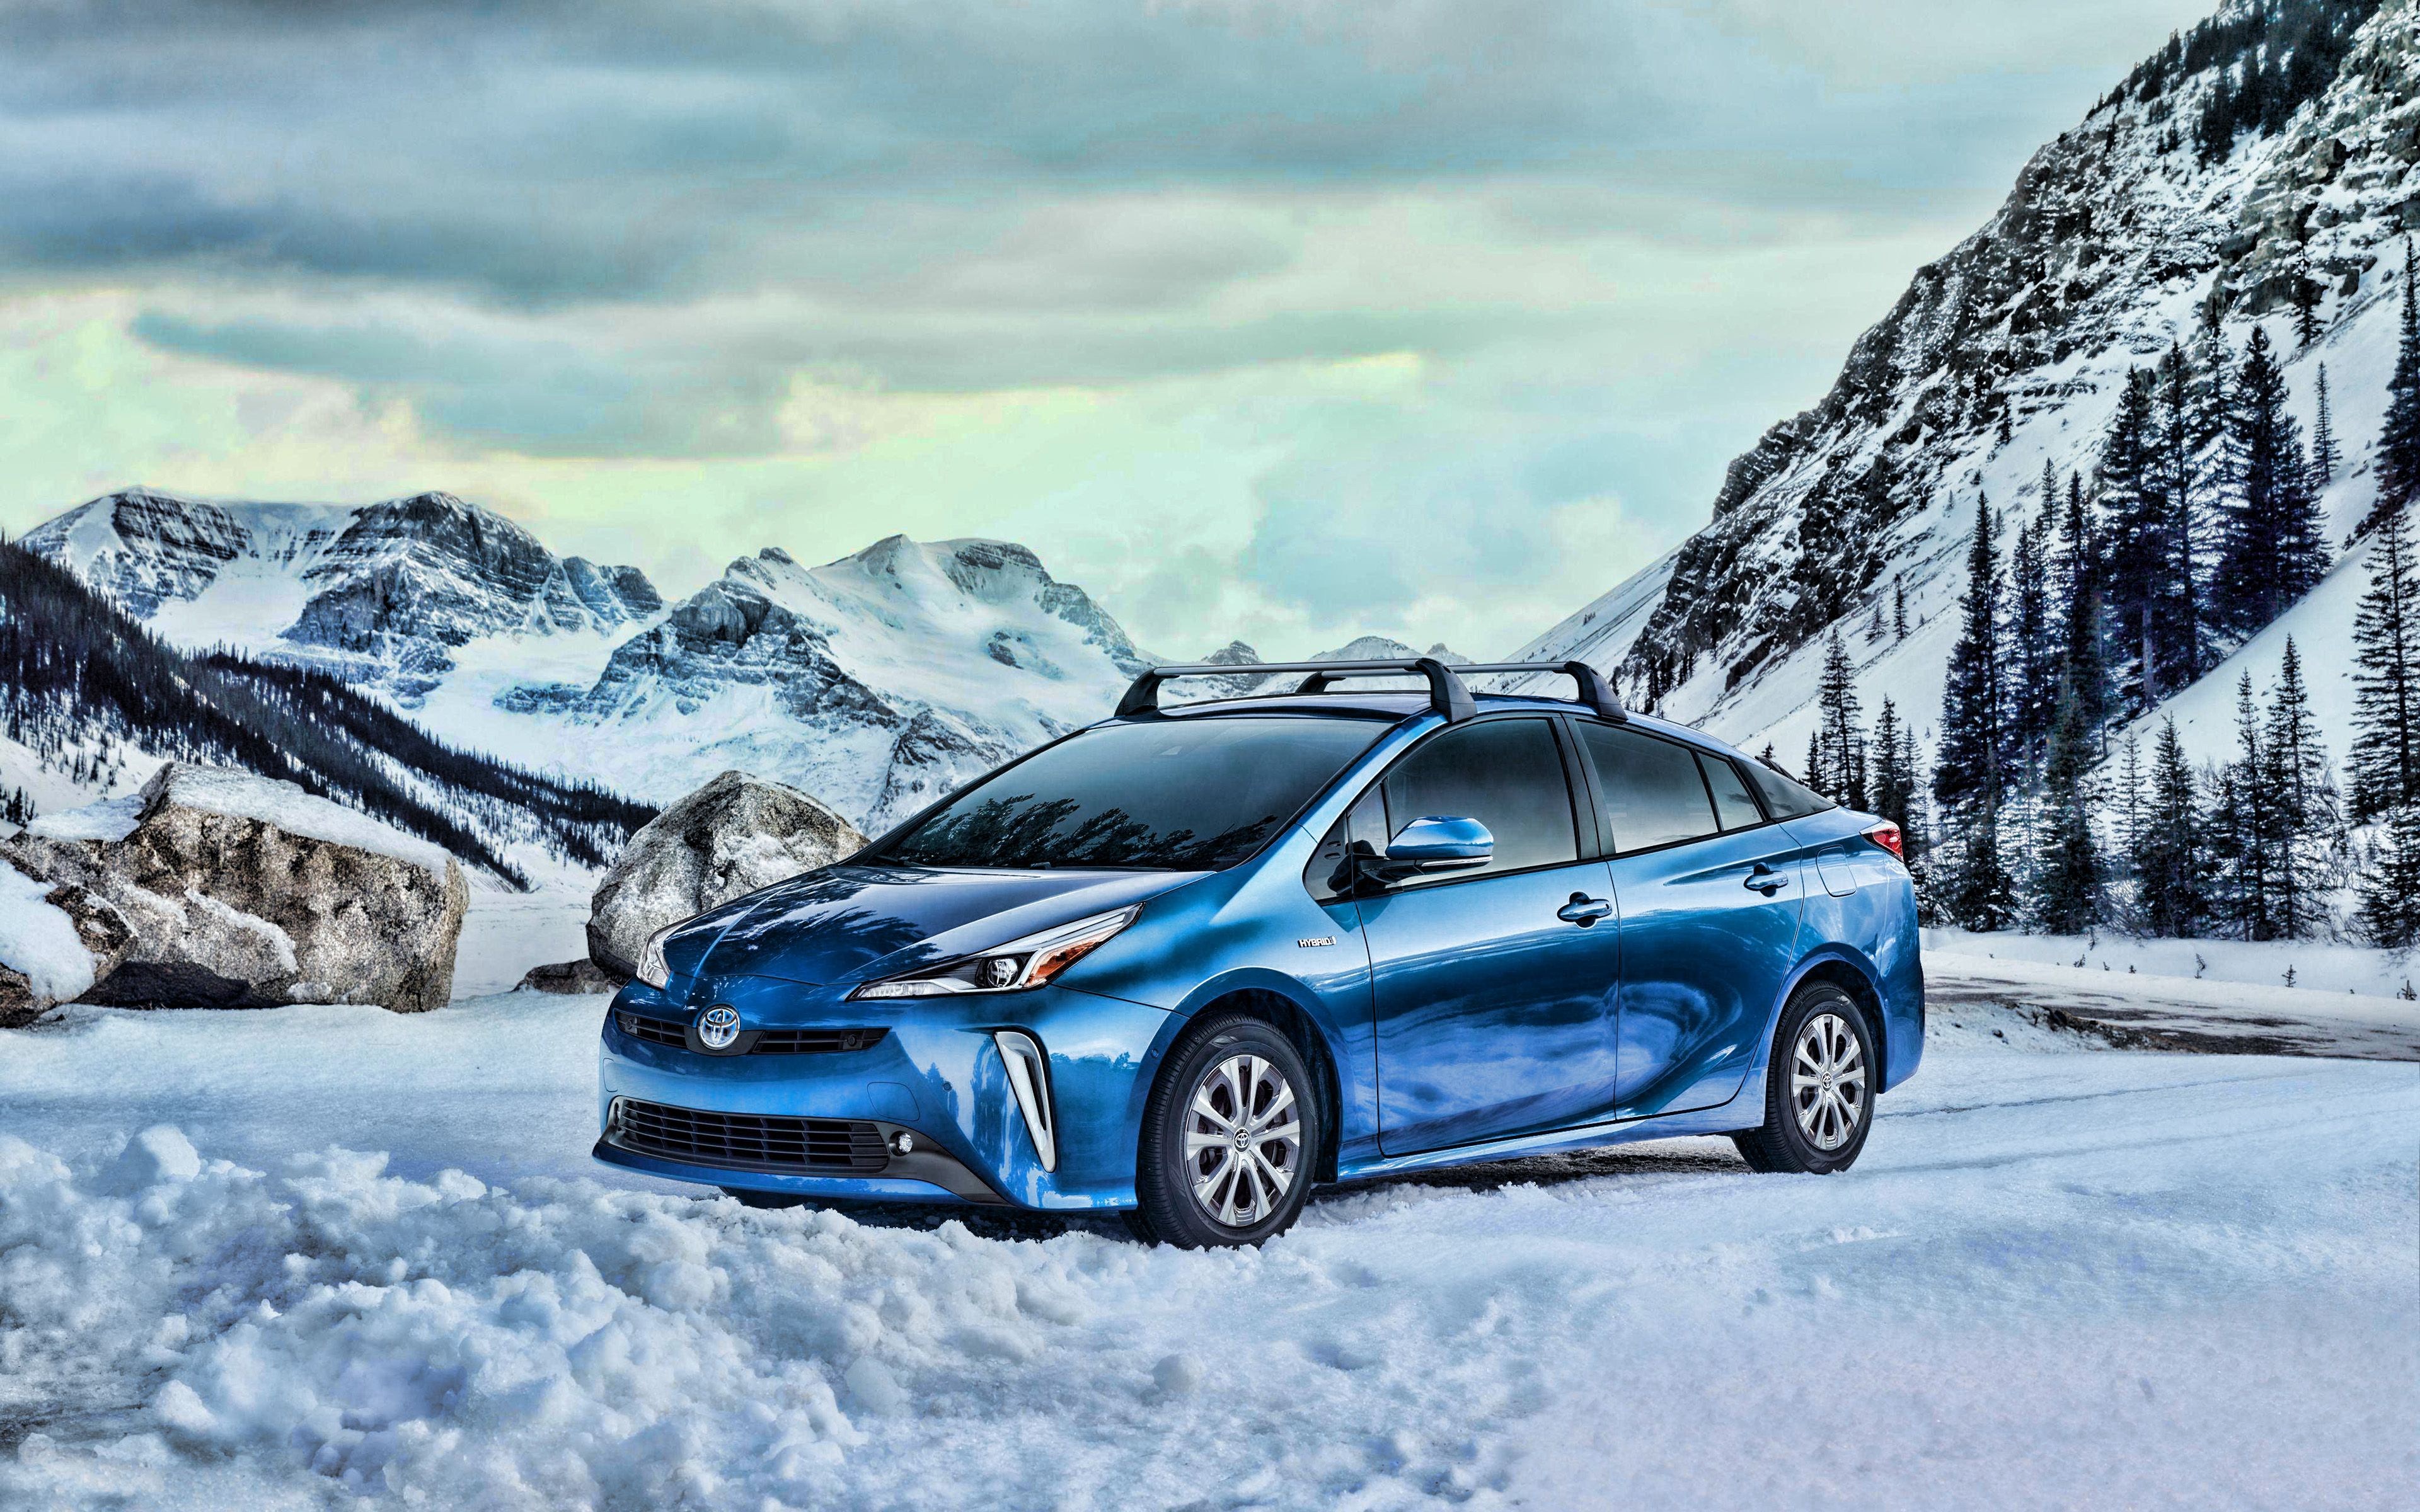 Download wallpaper 4k, Toyota Prius Limited, winter, 2019 cars, blue Prius, offroad, car in snowdrifts, 2019 Toyota Prius, japanese cars, Toyota for desktop with resolution 3840x2400. High Quality HD picture wallpaper